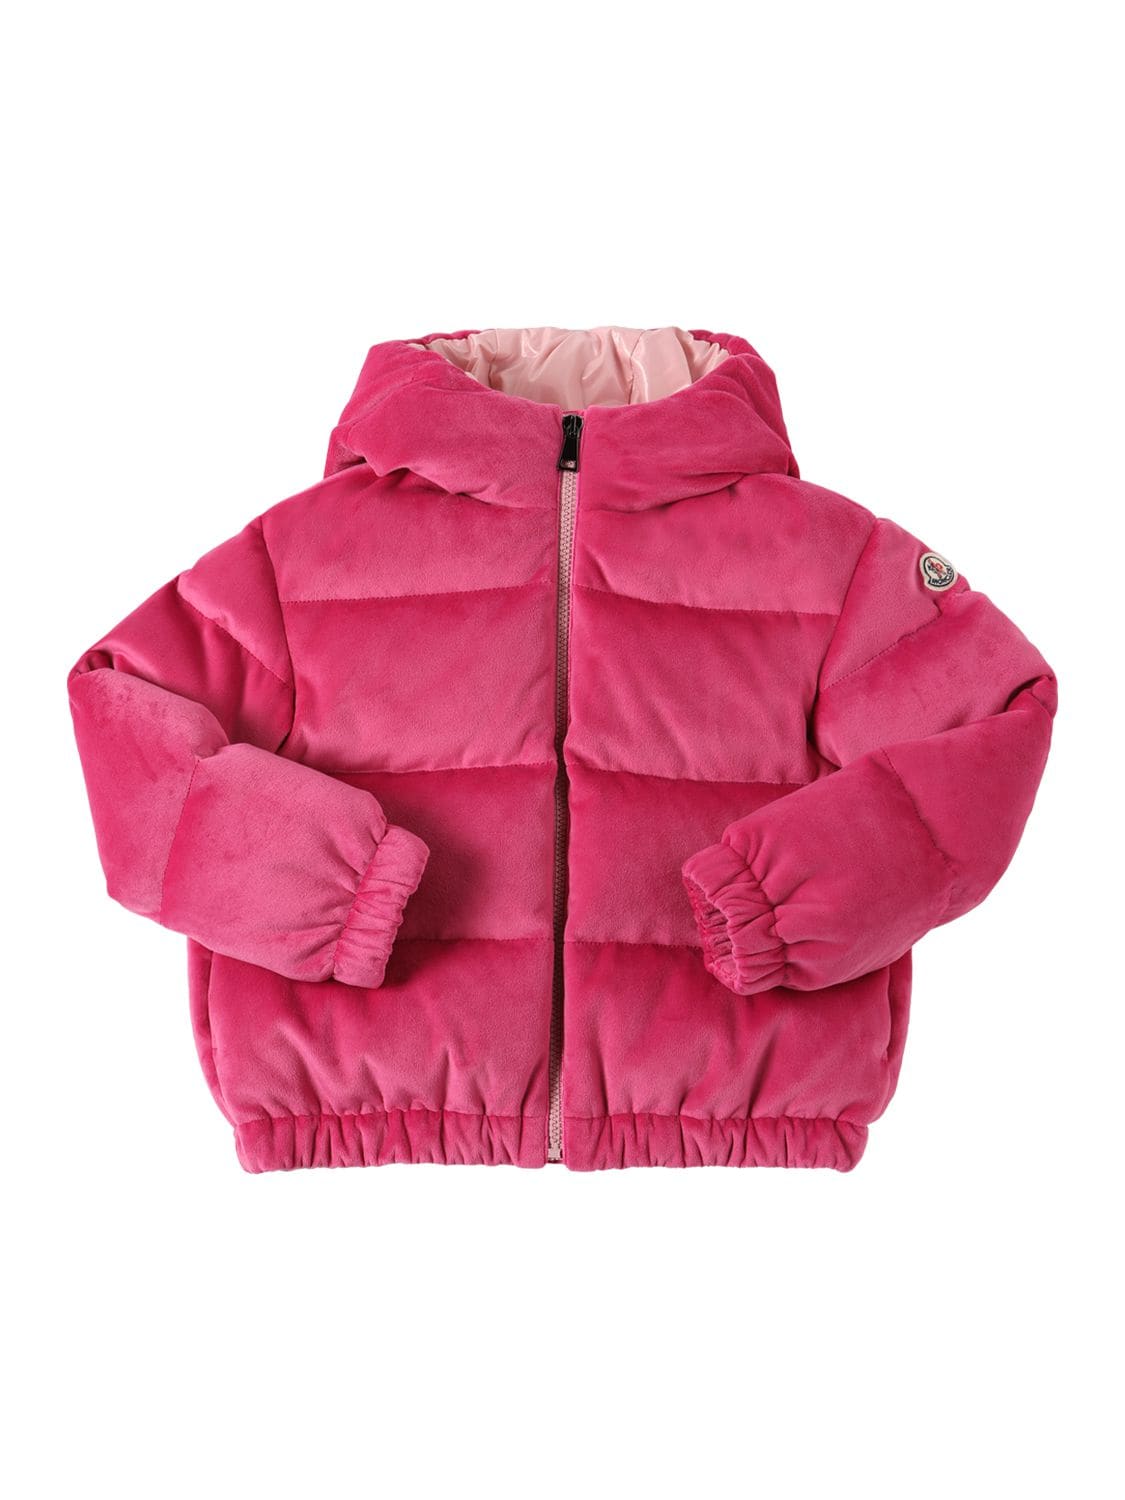 Moncler Kids' Daos Nylon Chenille Down Jacket In Bright Pink